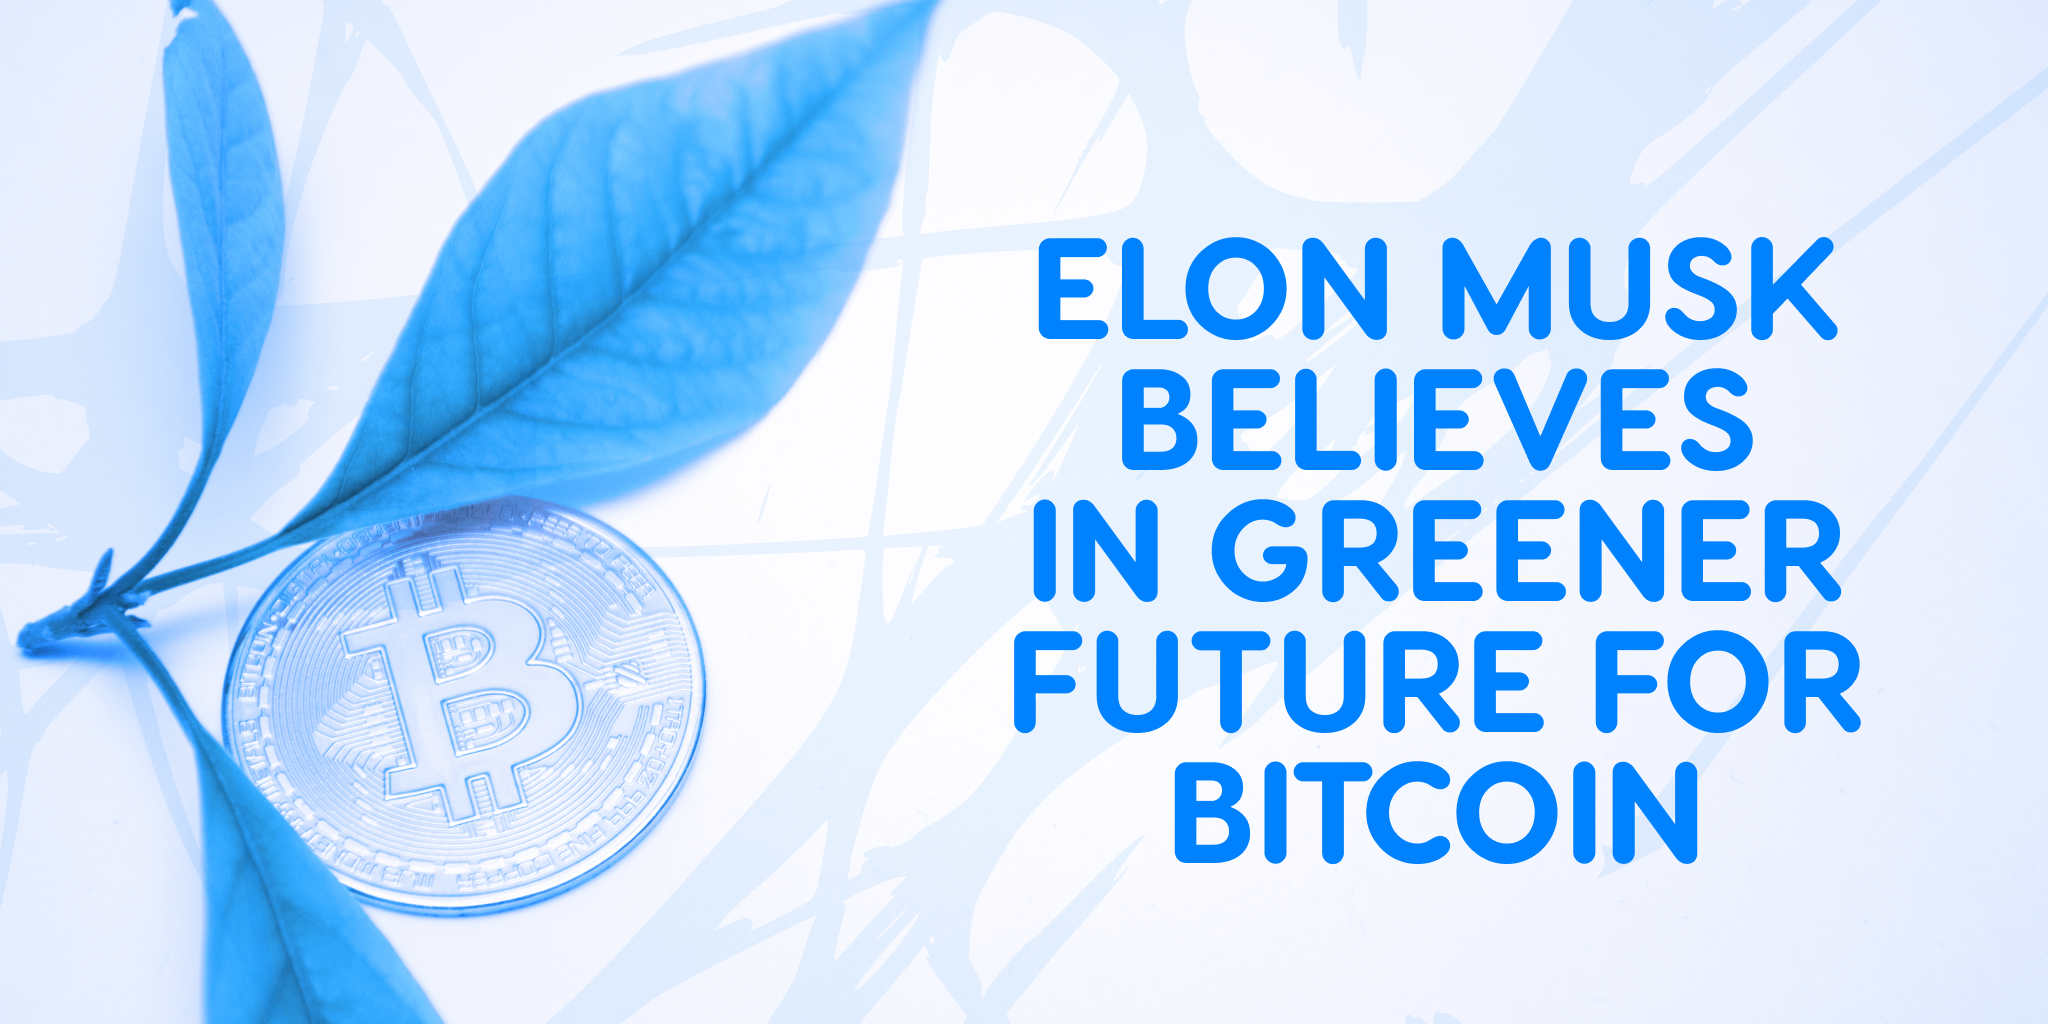 Elon Musk believes in a greener future for Bitcoin